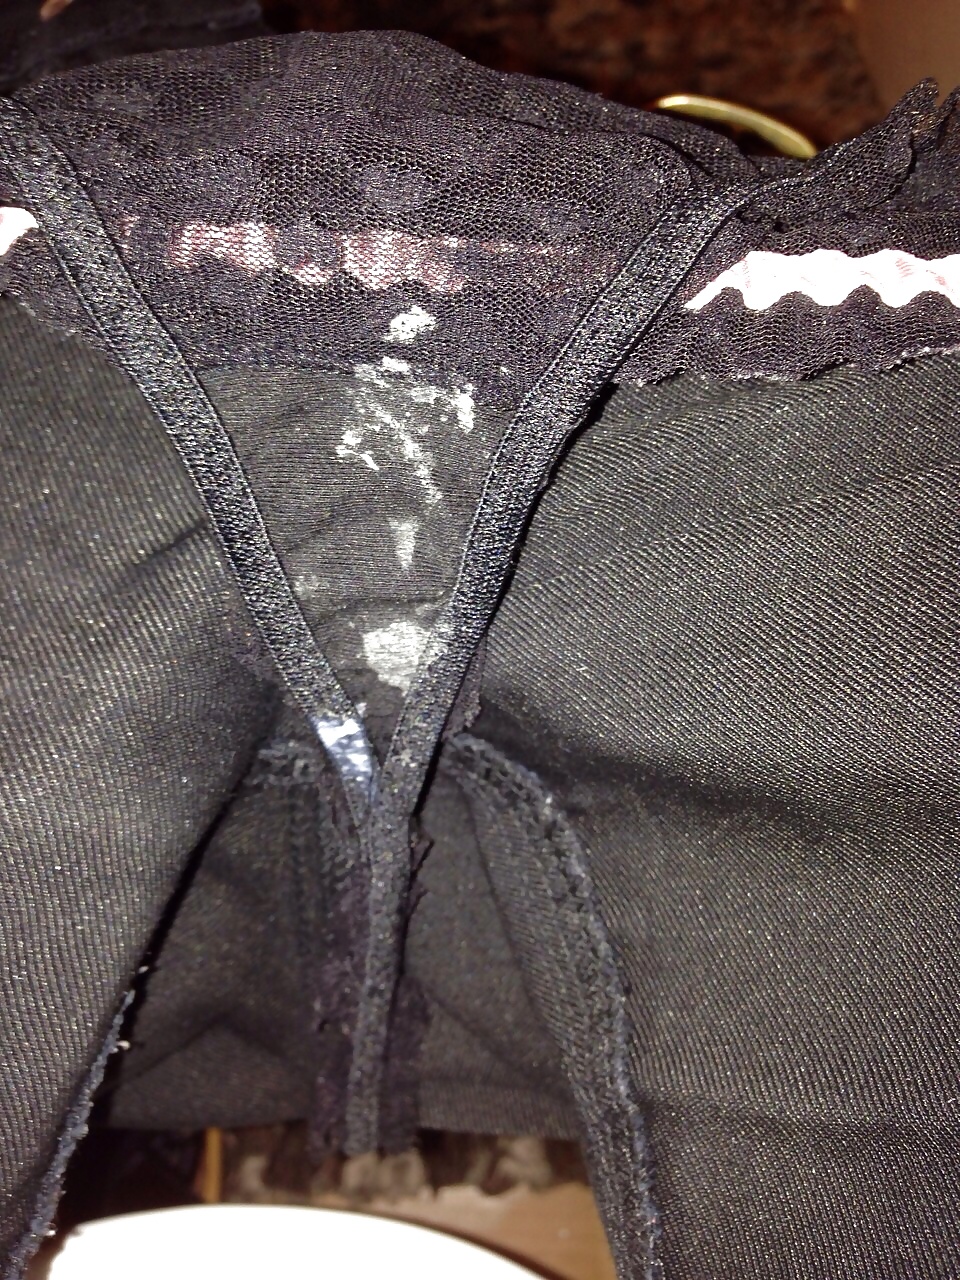 my knickers are creamed up after shoppin today he he #32591320